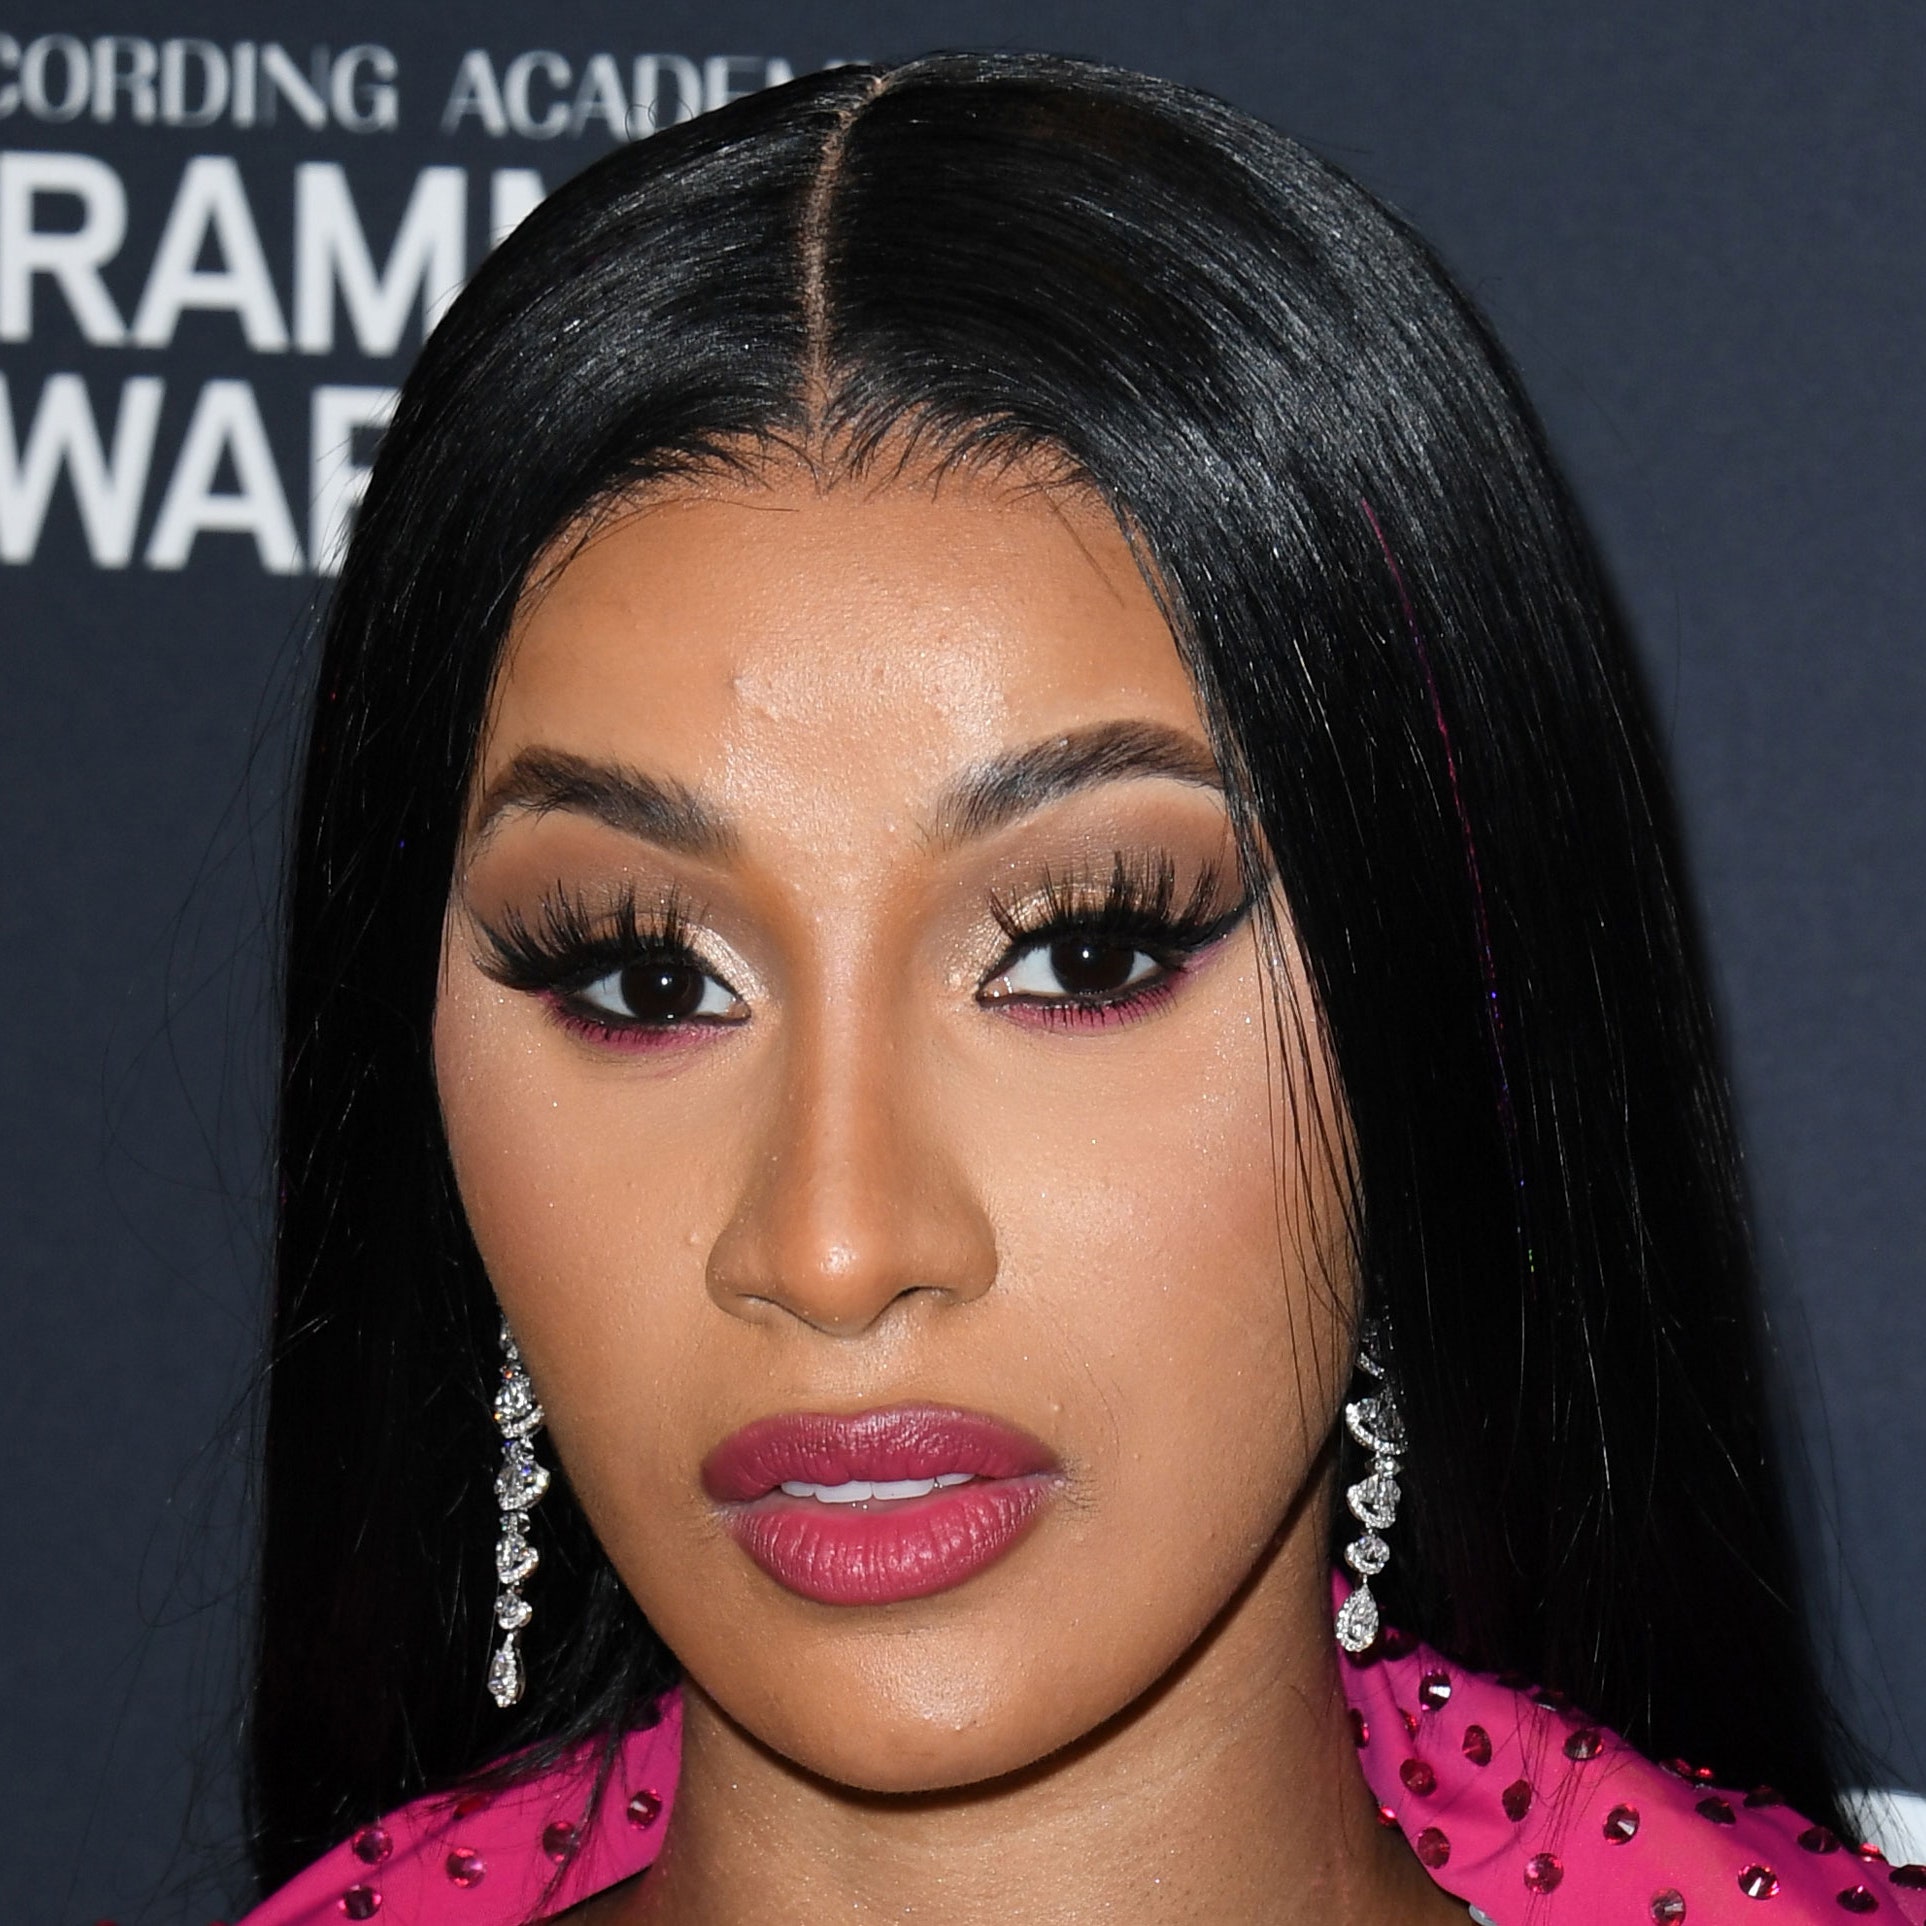 A Mom Recreated Cardi B's Iconic Heart Shaped Pigtails On Her 7 Year Old Daughter